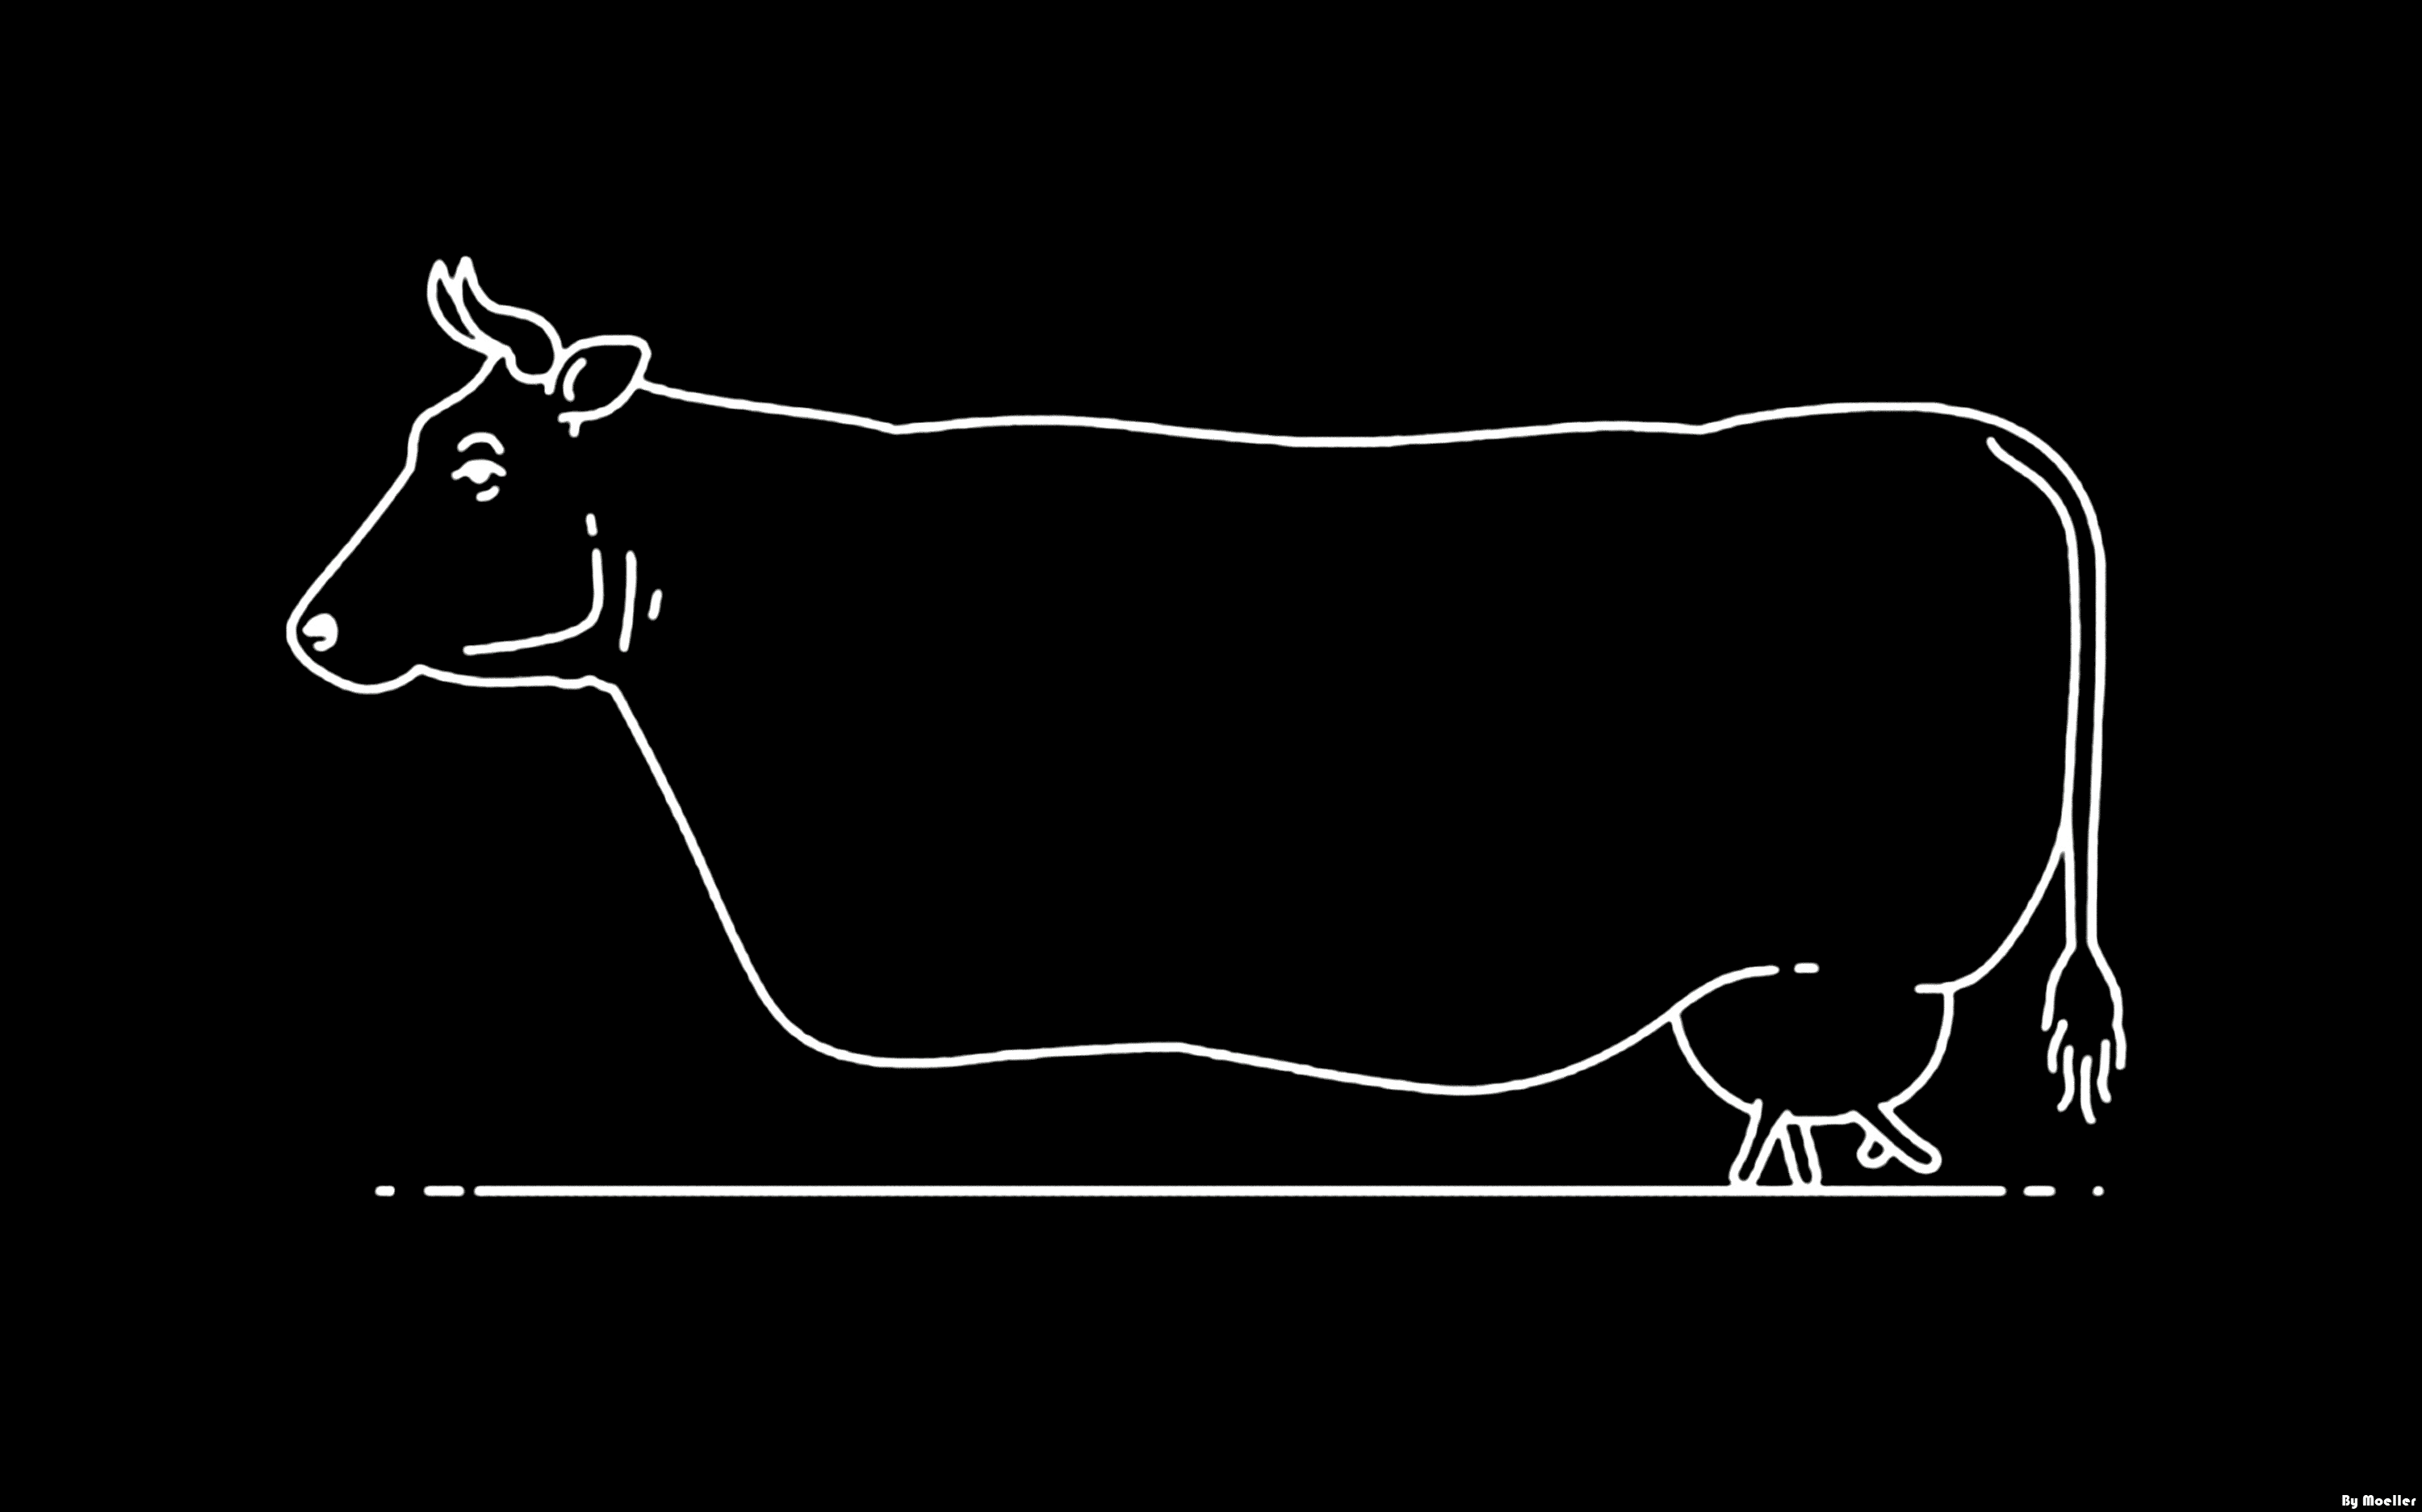 Cow Walking - "How the Cow Walk" - Black JPEG Edition 1 of 1